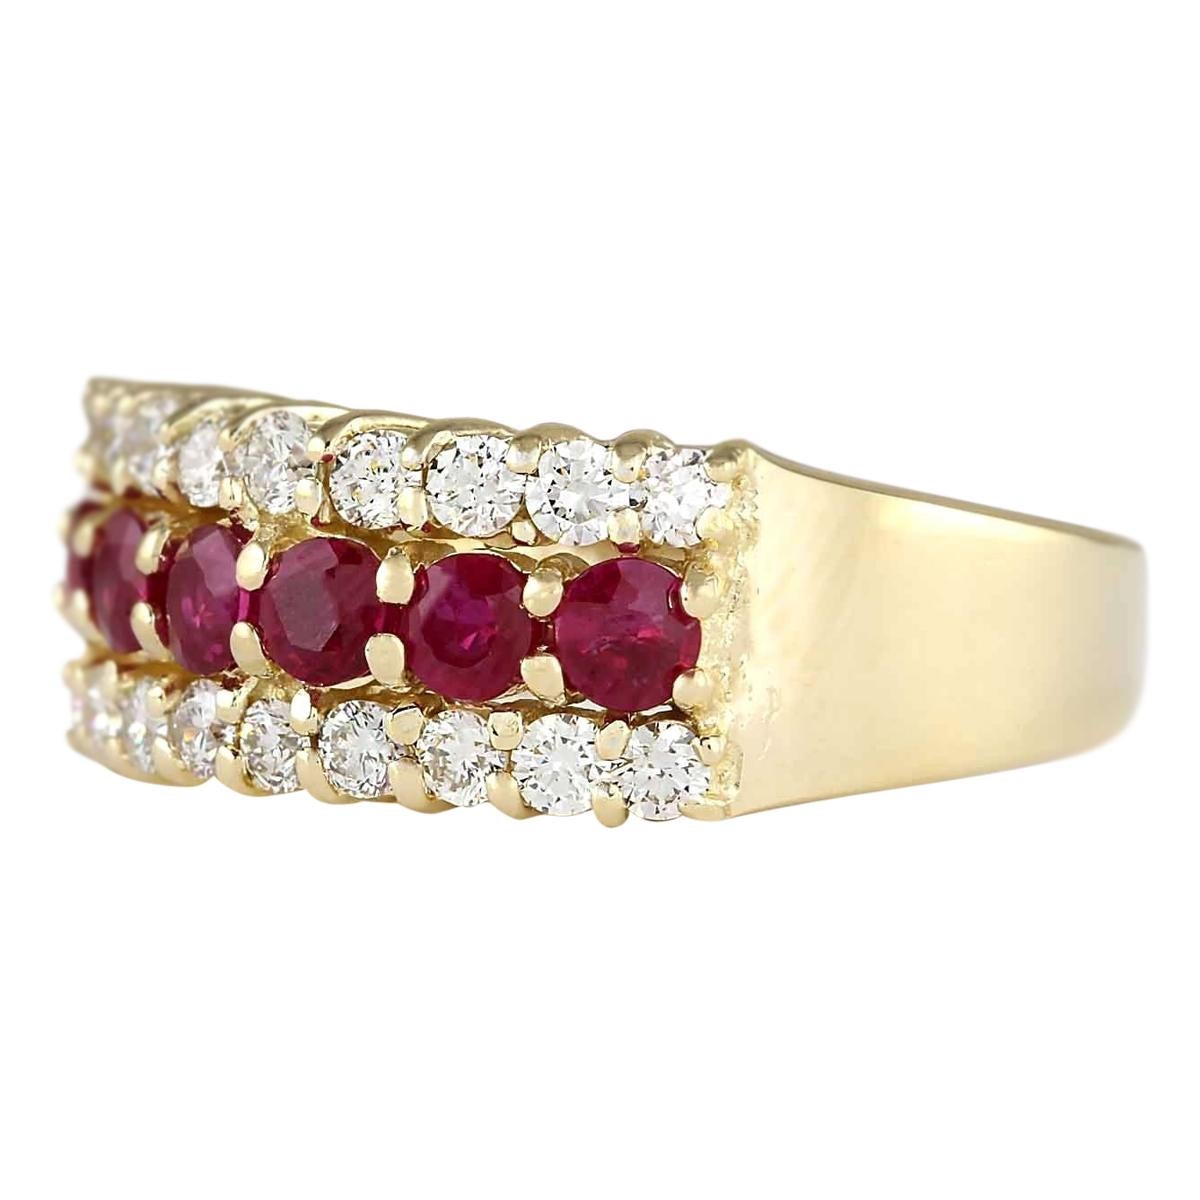 Stamped: 14K Yellow Gold
Total Ring Weight: 6.4 Grams
Total Natural Ruby Weight is 1.00 Carat
Color: Red
Diamond Weight: Total Natural Diamond Weight is 0.60 Carat
Color: F-G, Clarity: VS2-SI1
Face Measures: 8.05x17.10 mm
Sku: [703582W]